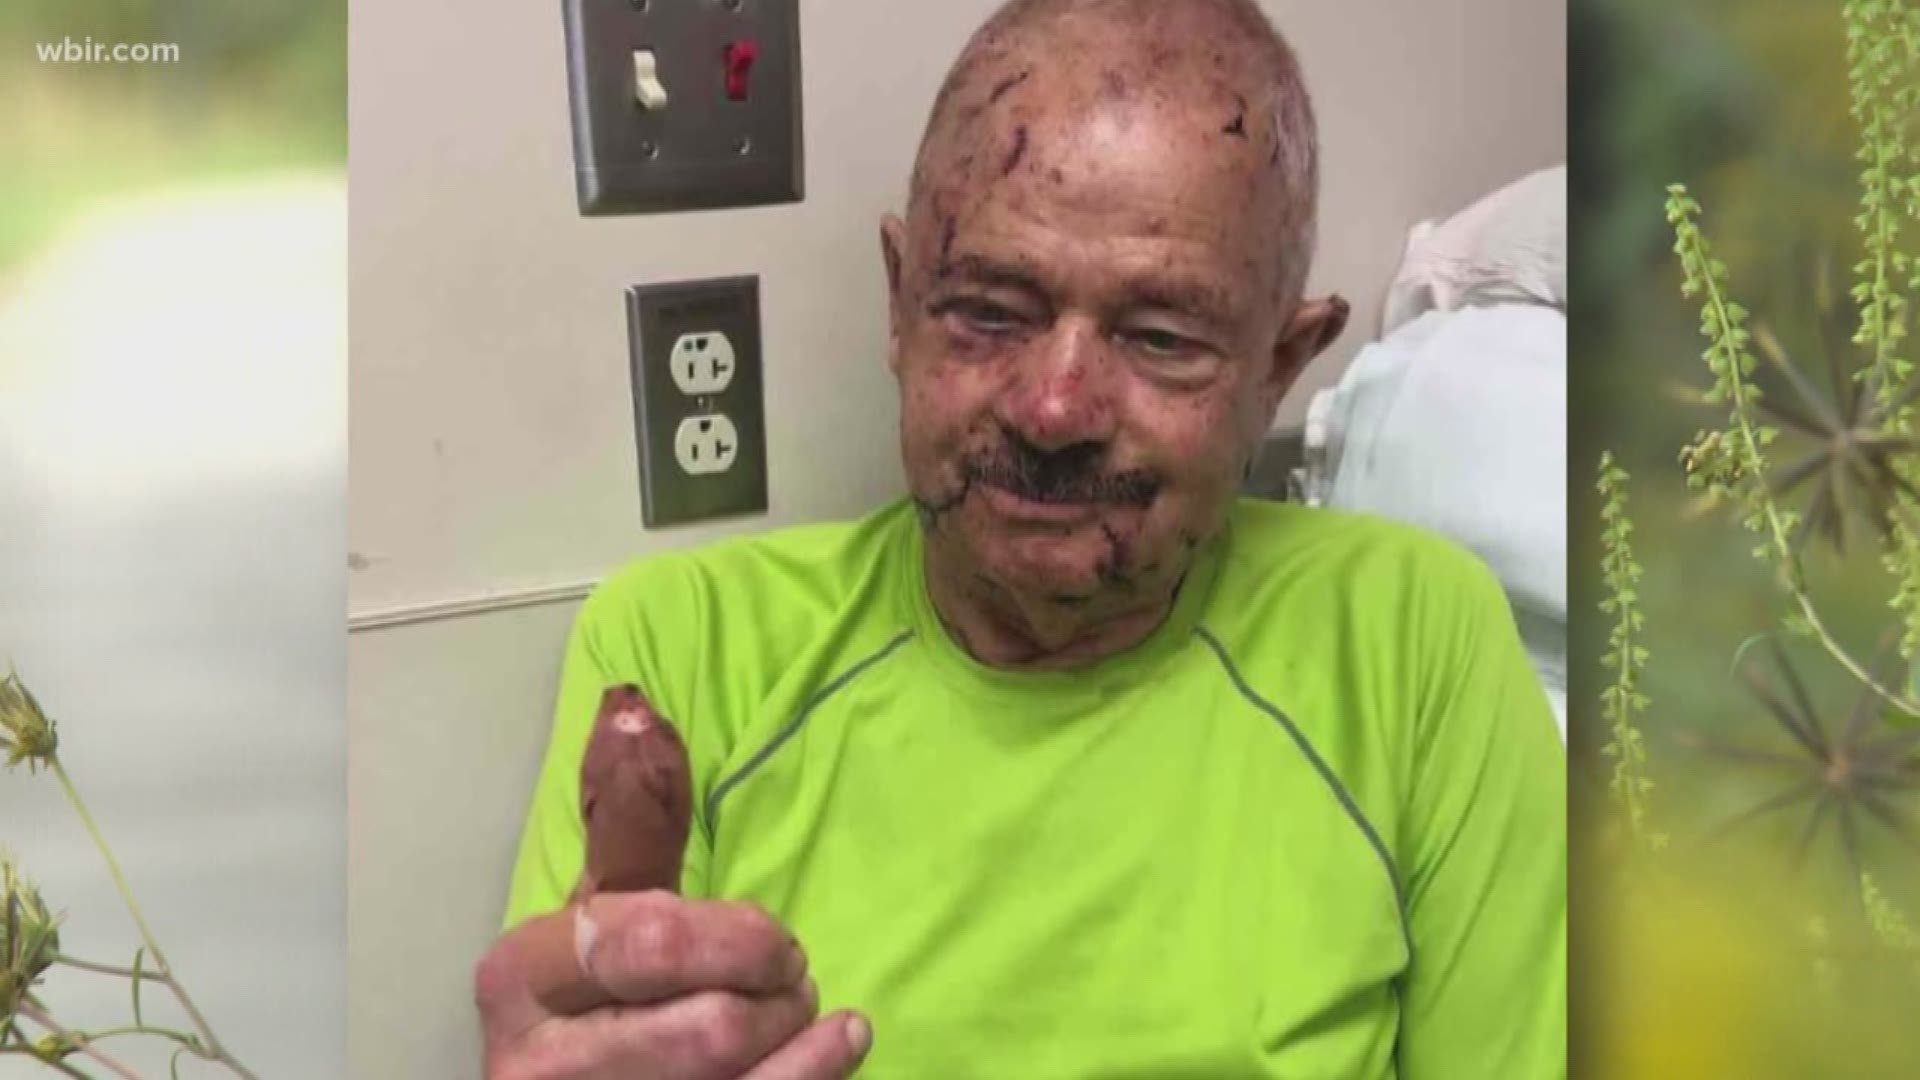 A runner is urging people to be more careful on the greenways in Knoxville after he found a man who was attacked on a trail.